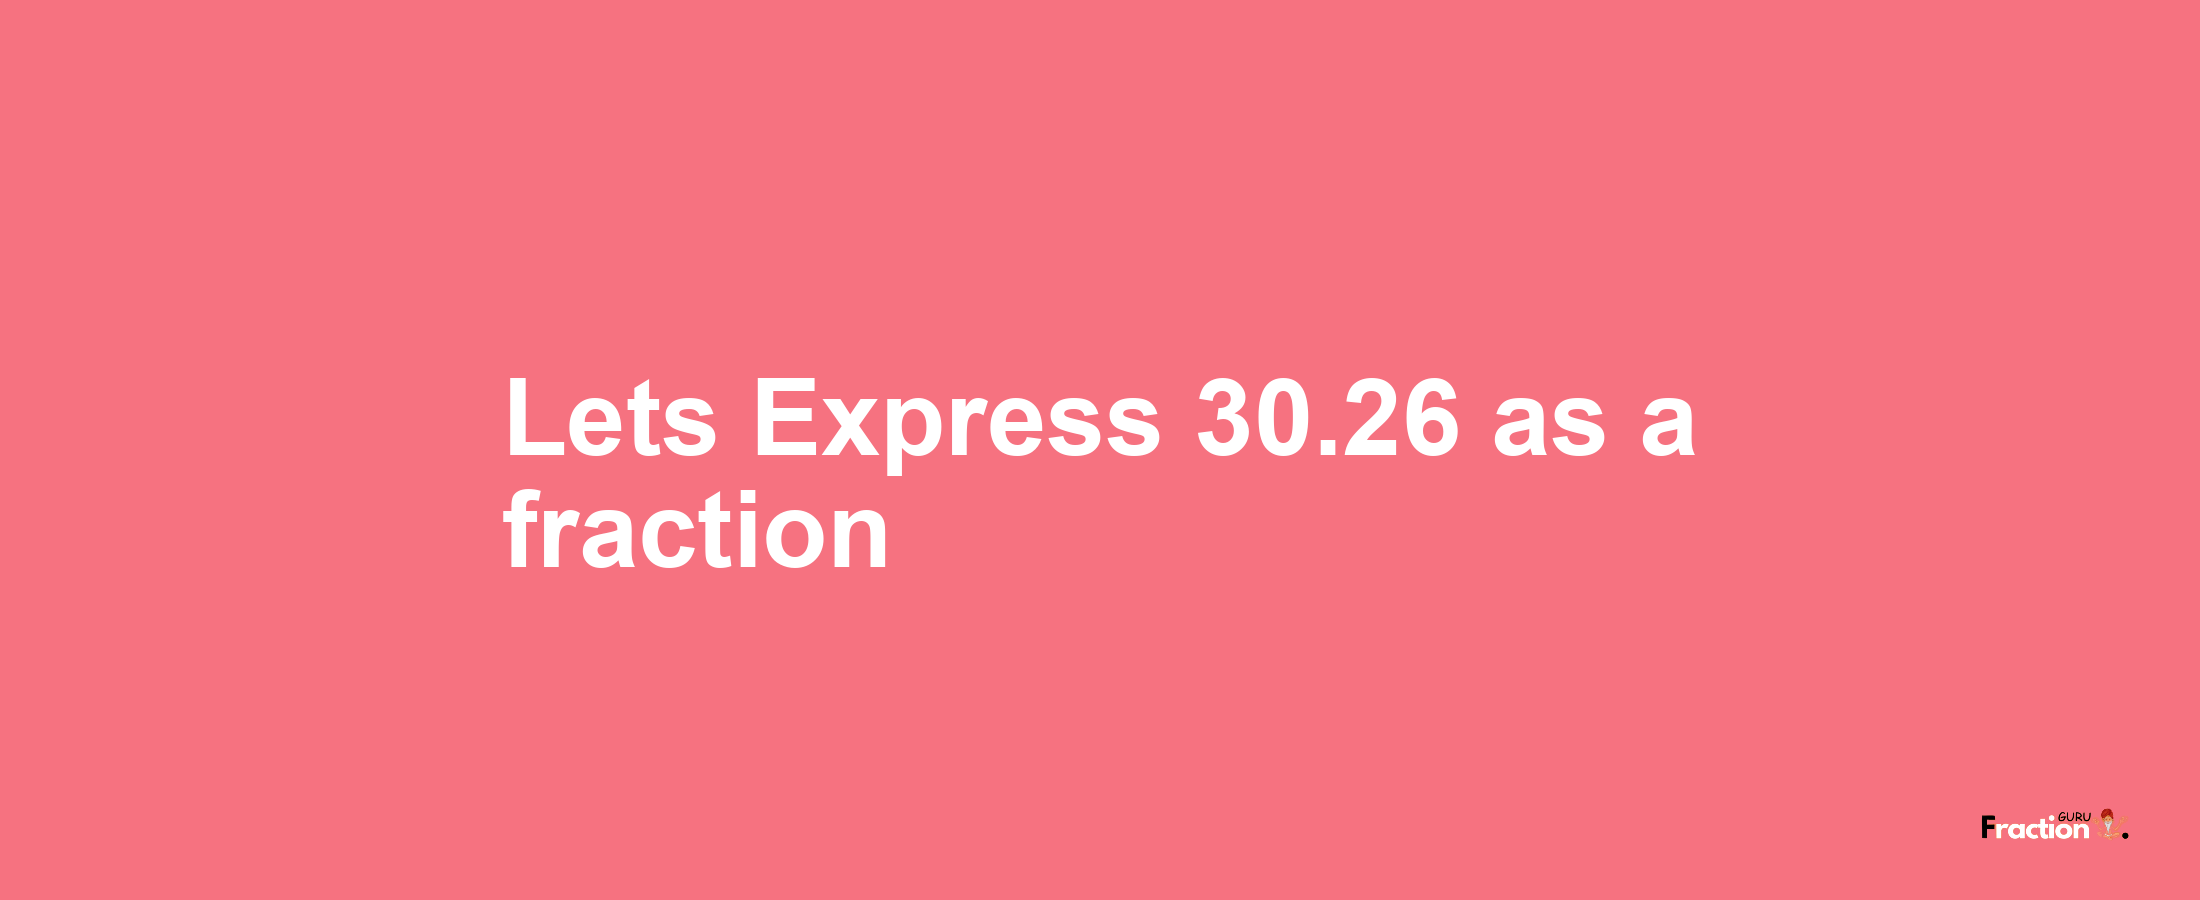 Lets Express 30.26 as afraction